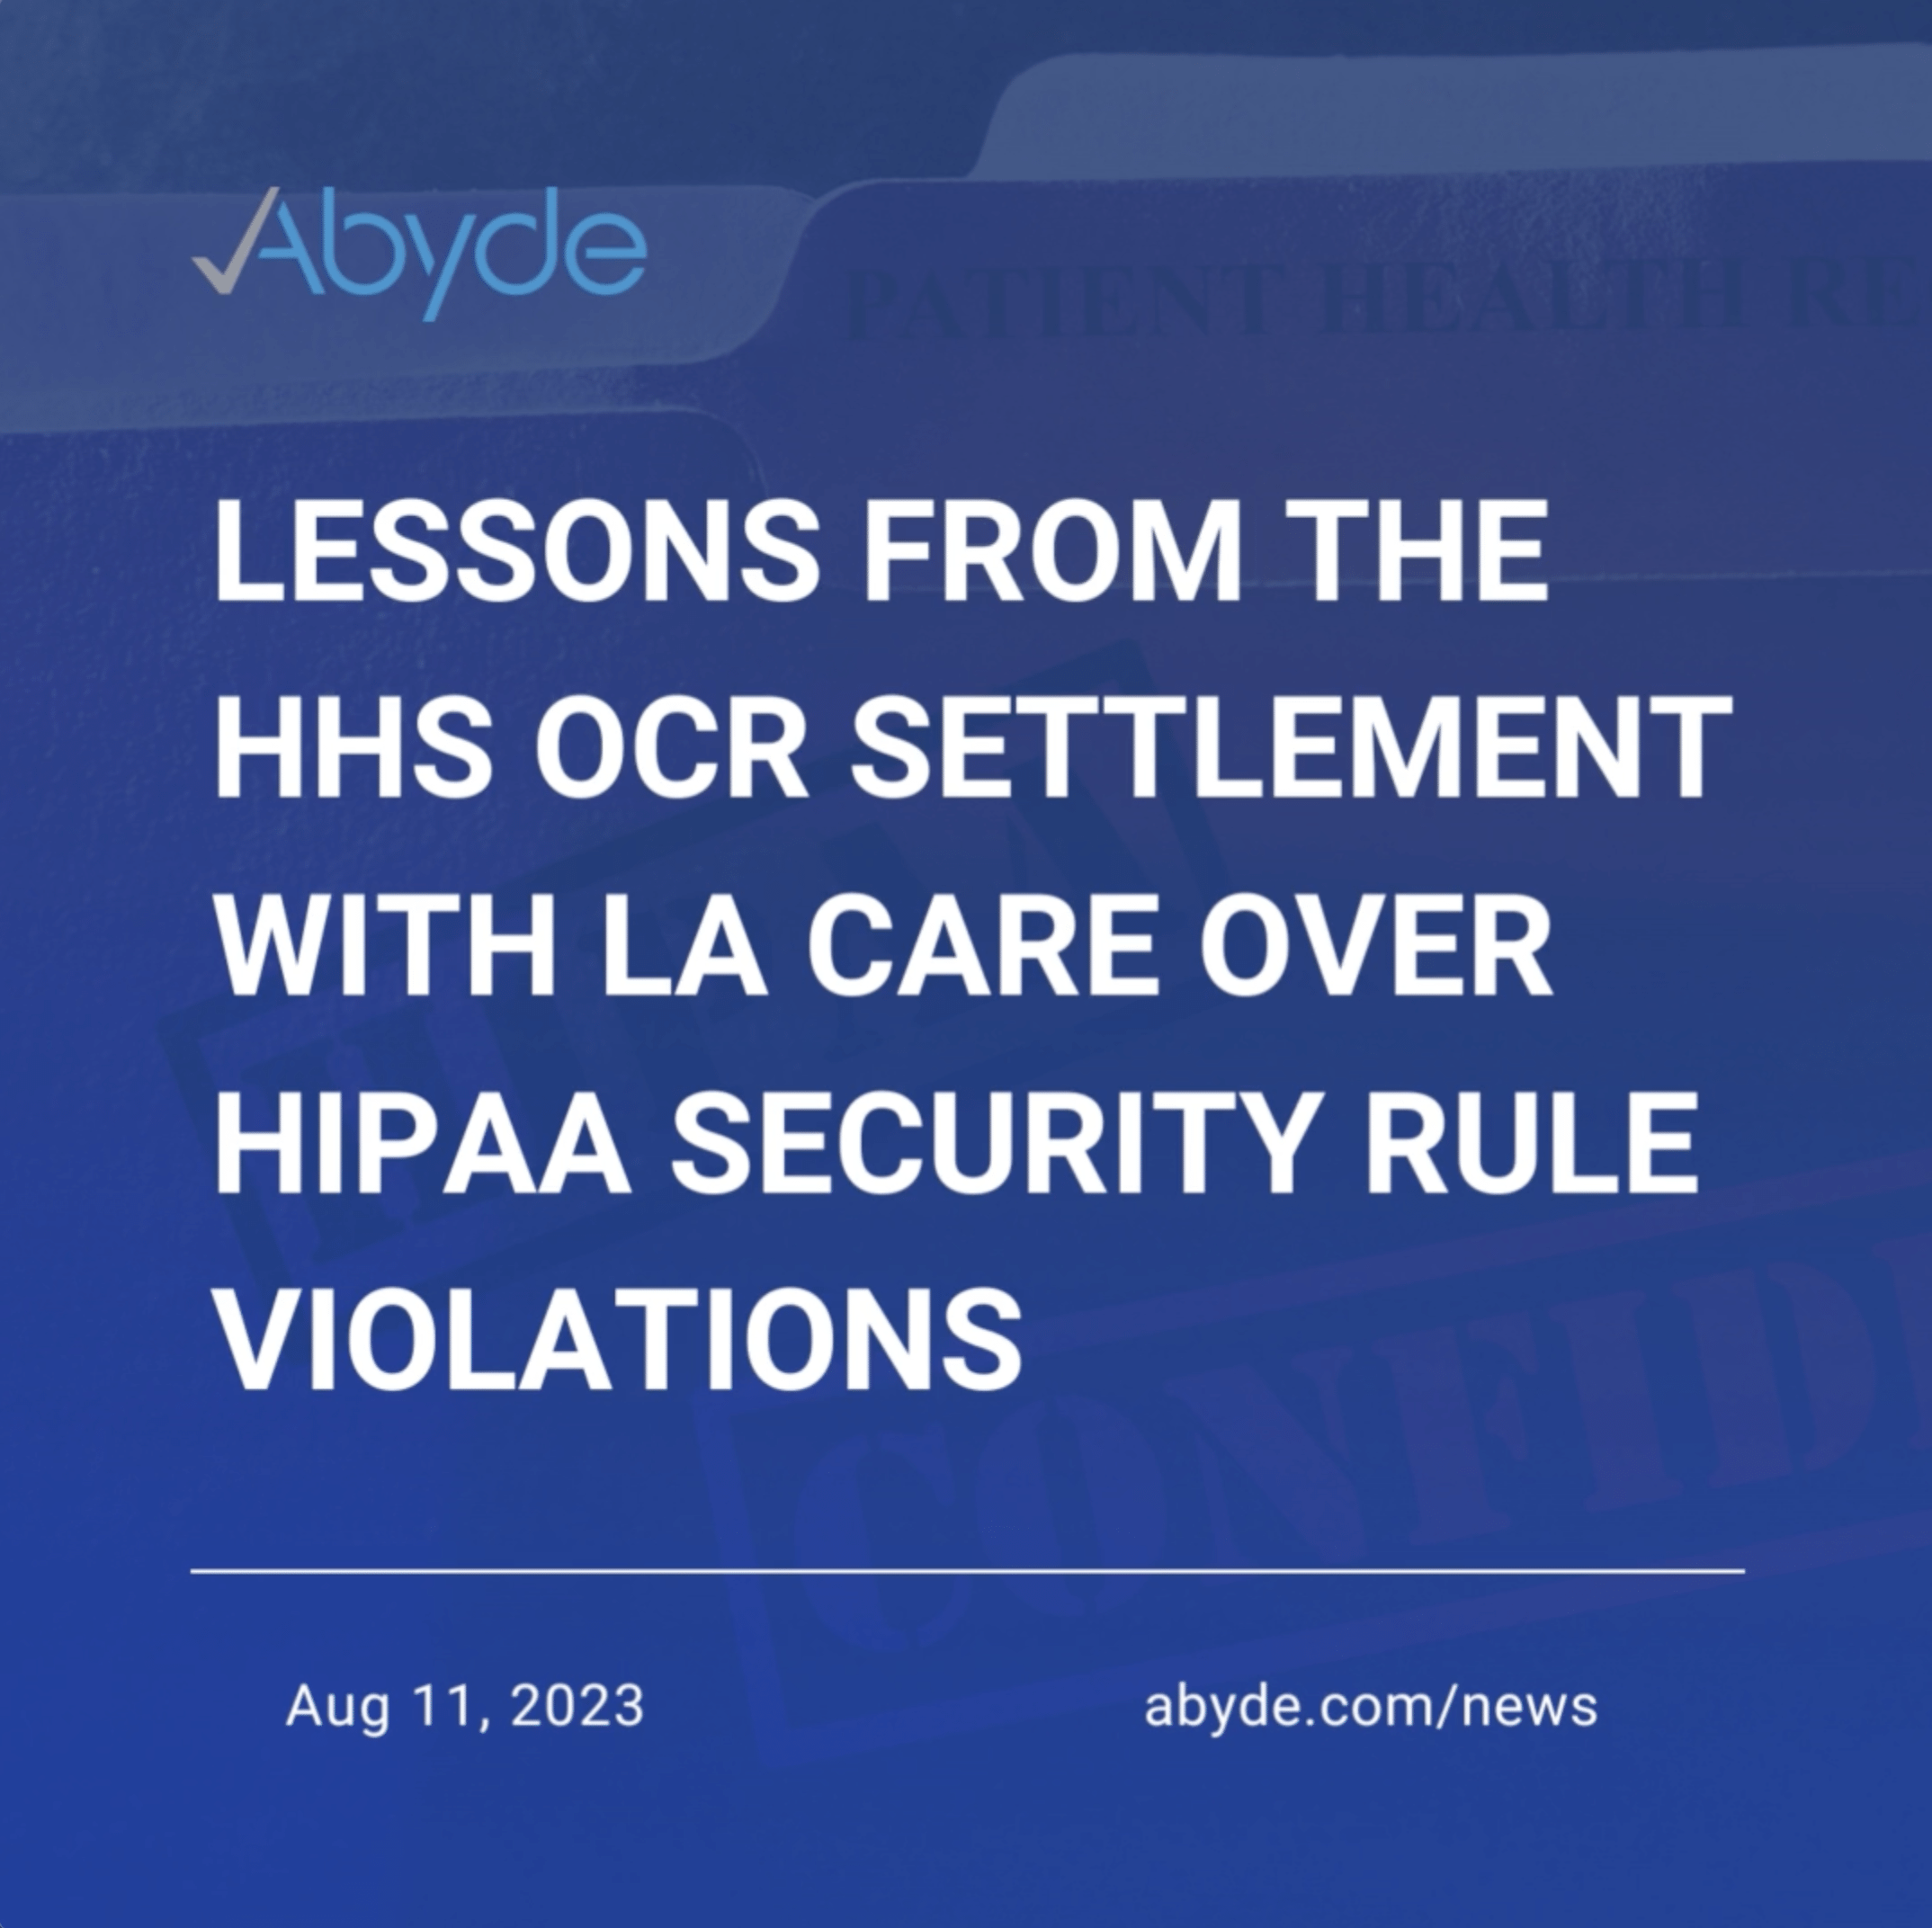 Lessons from the HHS OCR Settlement with LA Care Over HIPAA Security Rule Violations